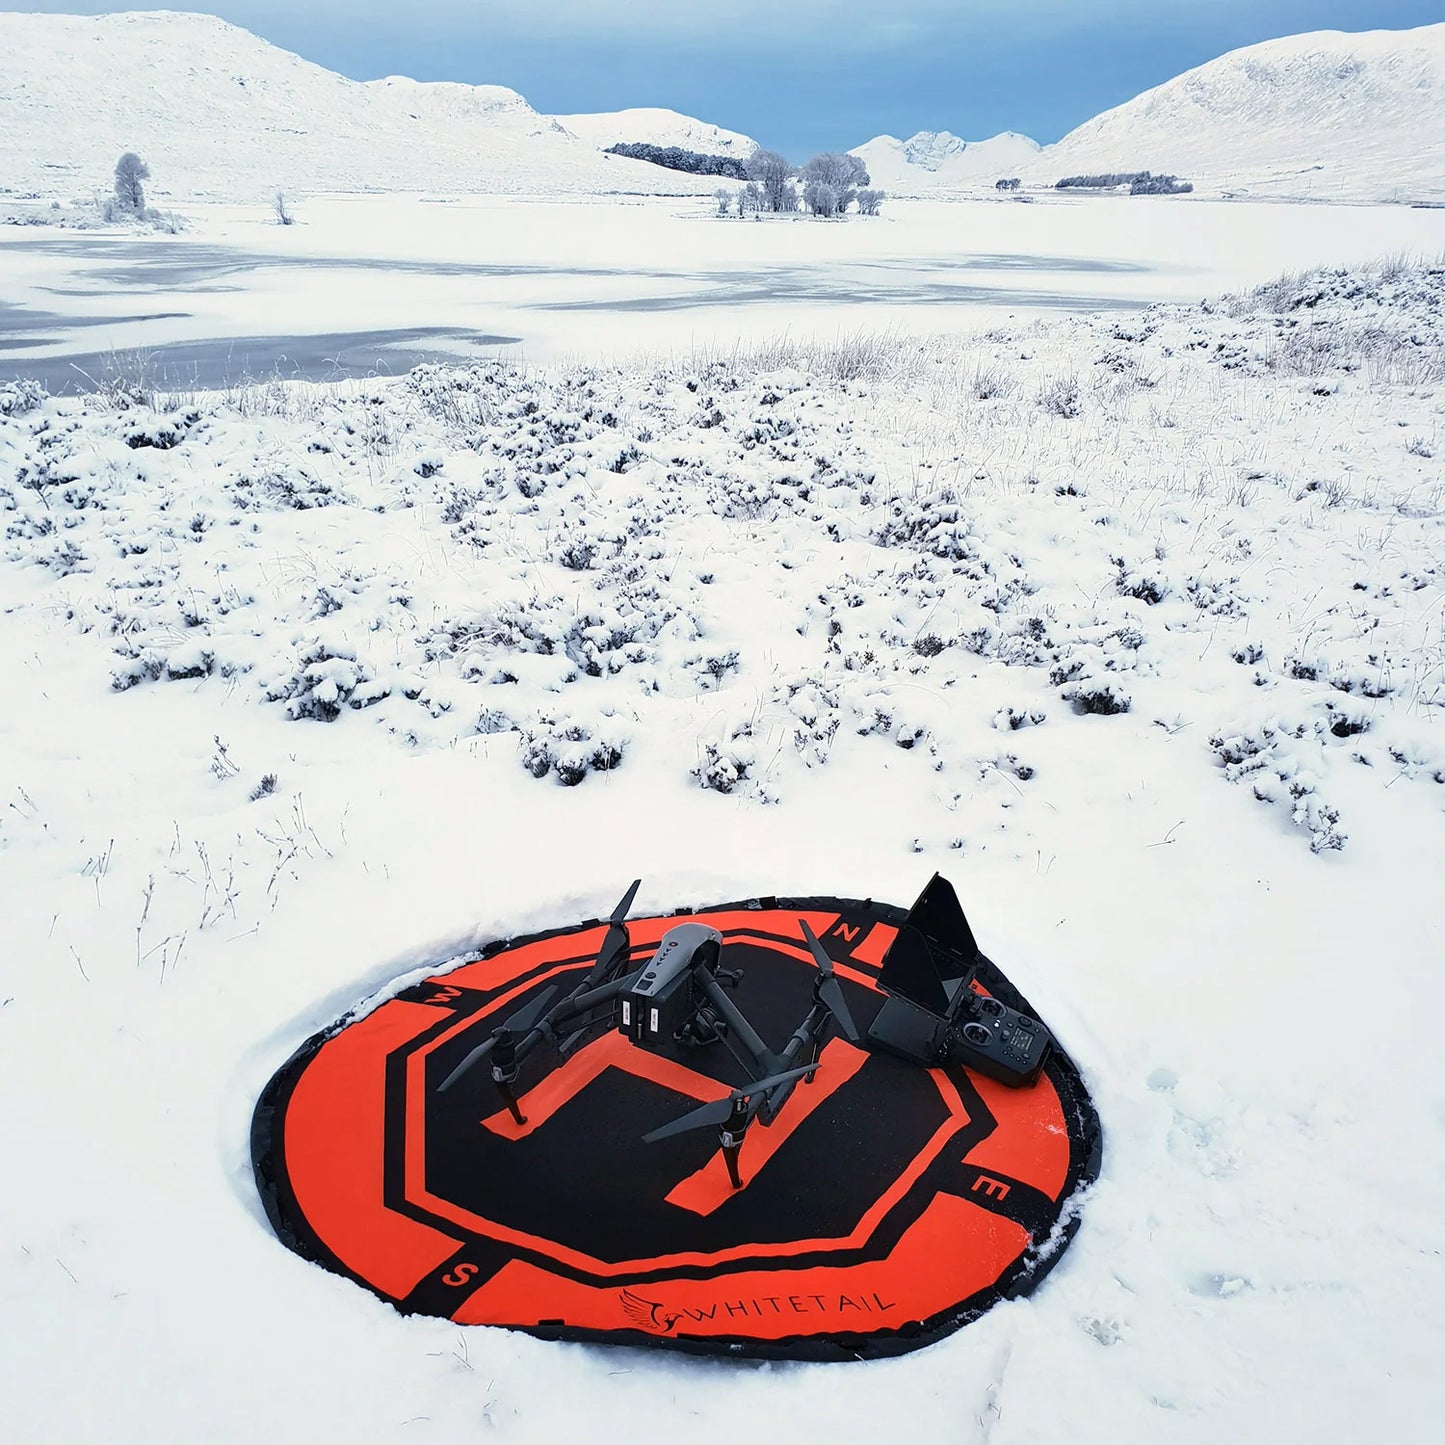 Weighted Drone Launch Pad on snow 